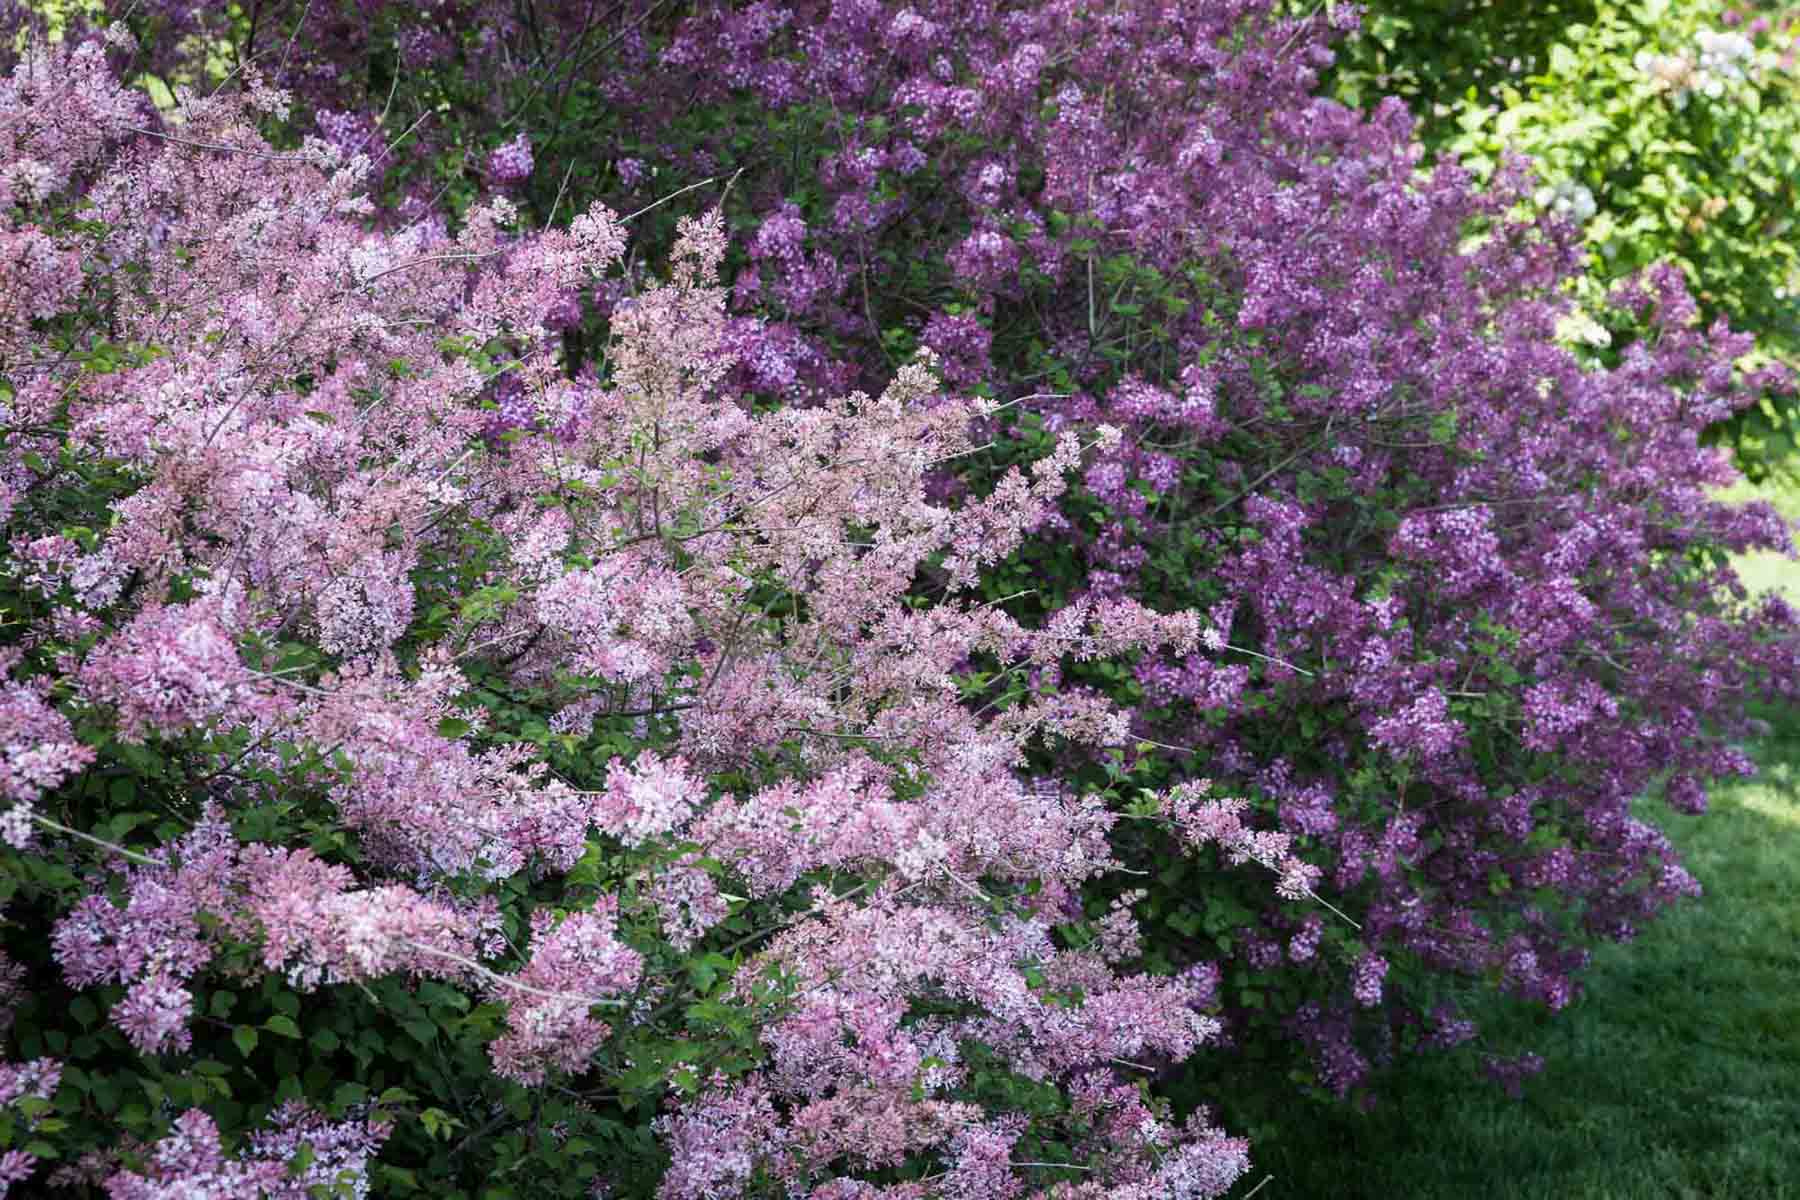 Bushes of lilacs at the New York Botanical Garden